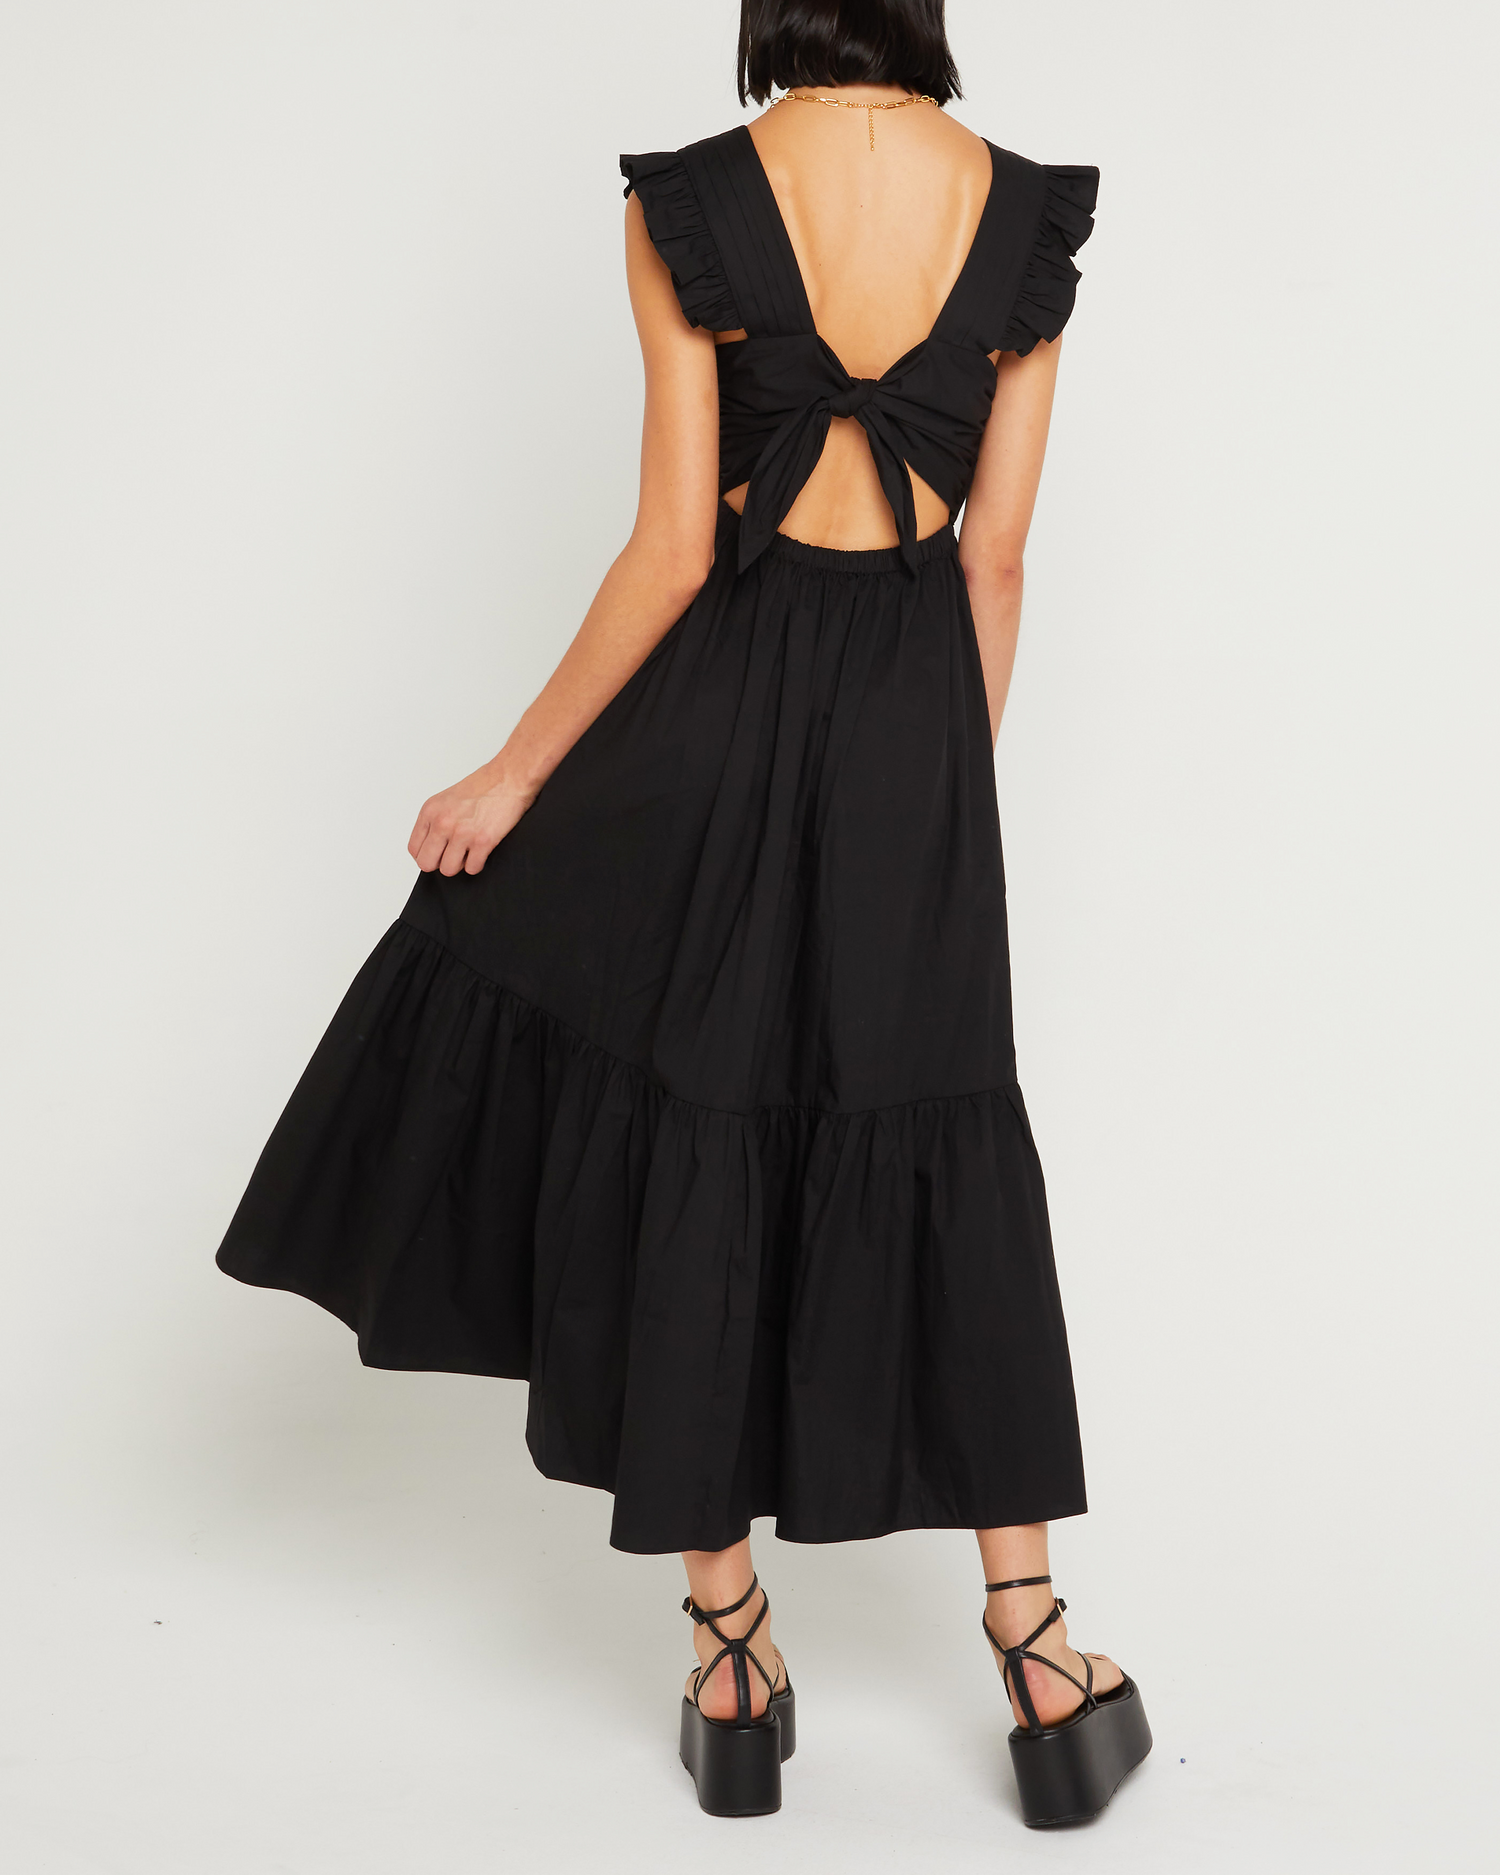 Fifth image of Stella Dress, a black midi dress, front buttons, ruffle sleeve, open back, tied ribbon, bow, tiered